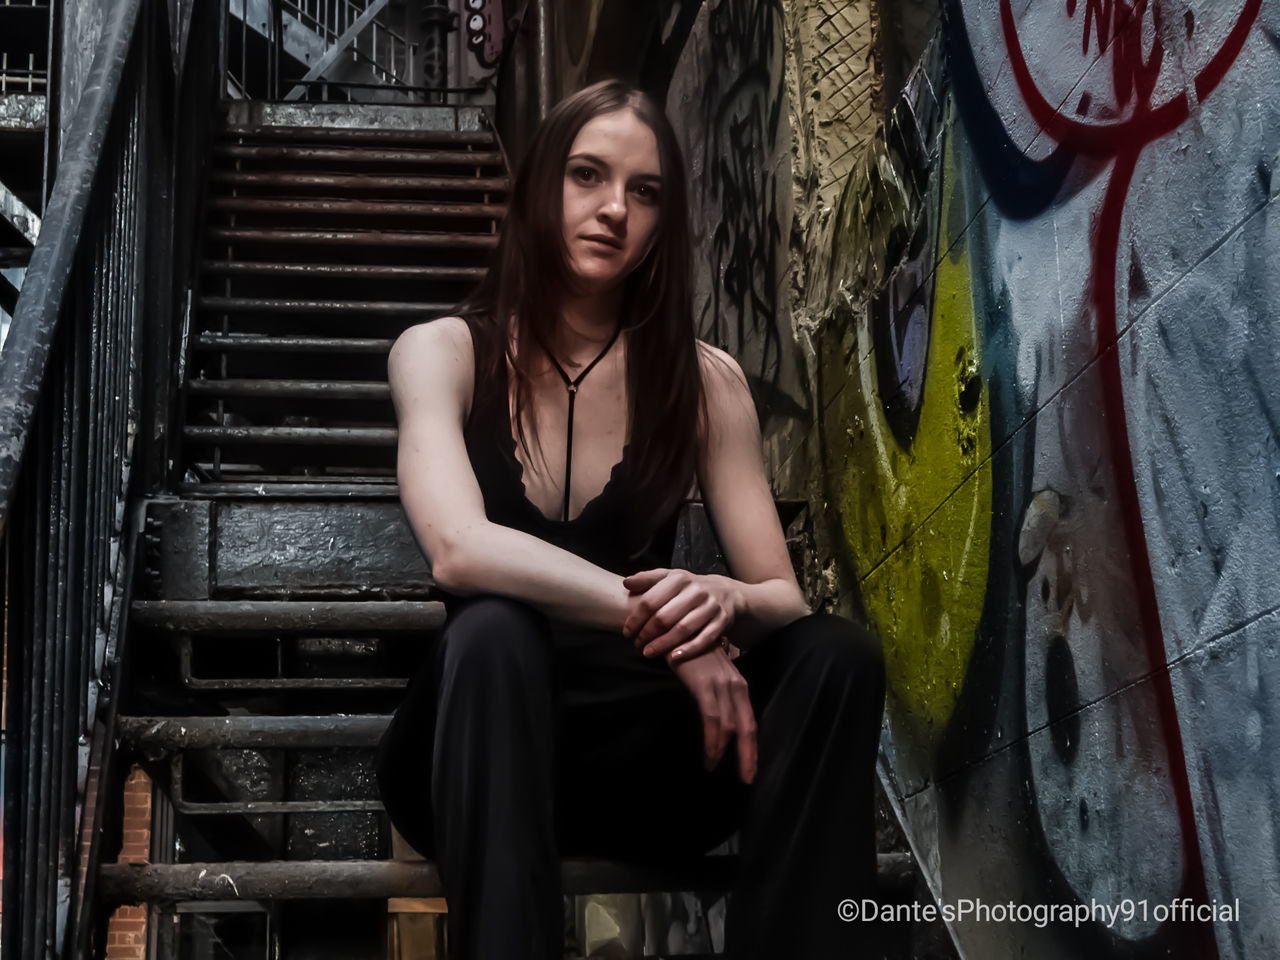 one person, graffiti, young adult, sitting, front view, real people, lifestyles, staircase, young women, casual clothing, architecture, three quarter length, leisure activity, beautiful woman, steps and staircases, beauty, hairstyle, hair, teenager, contemplation